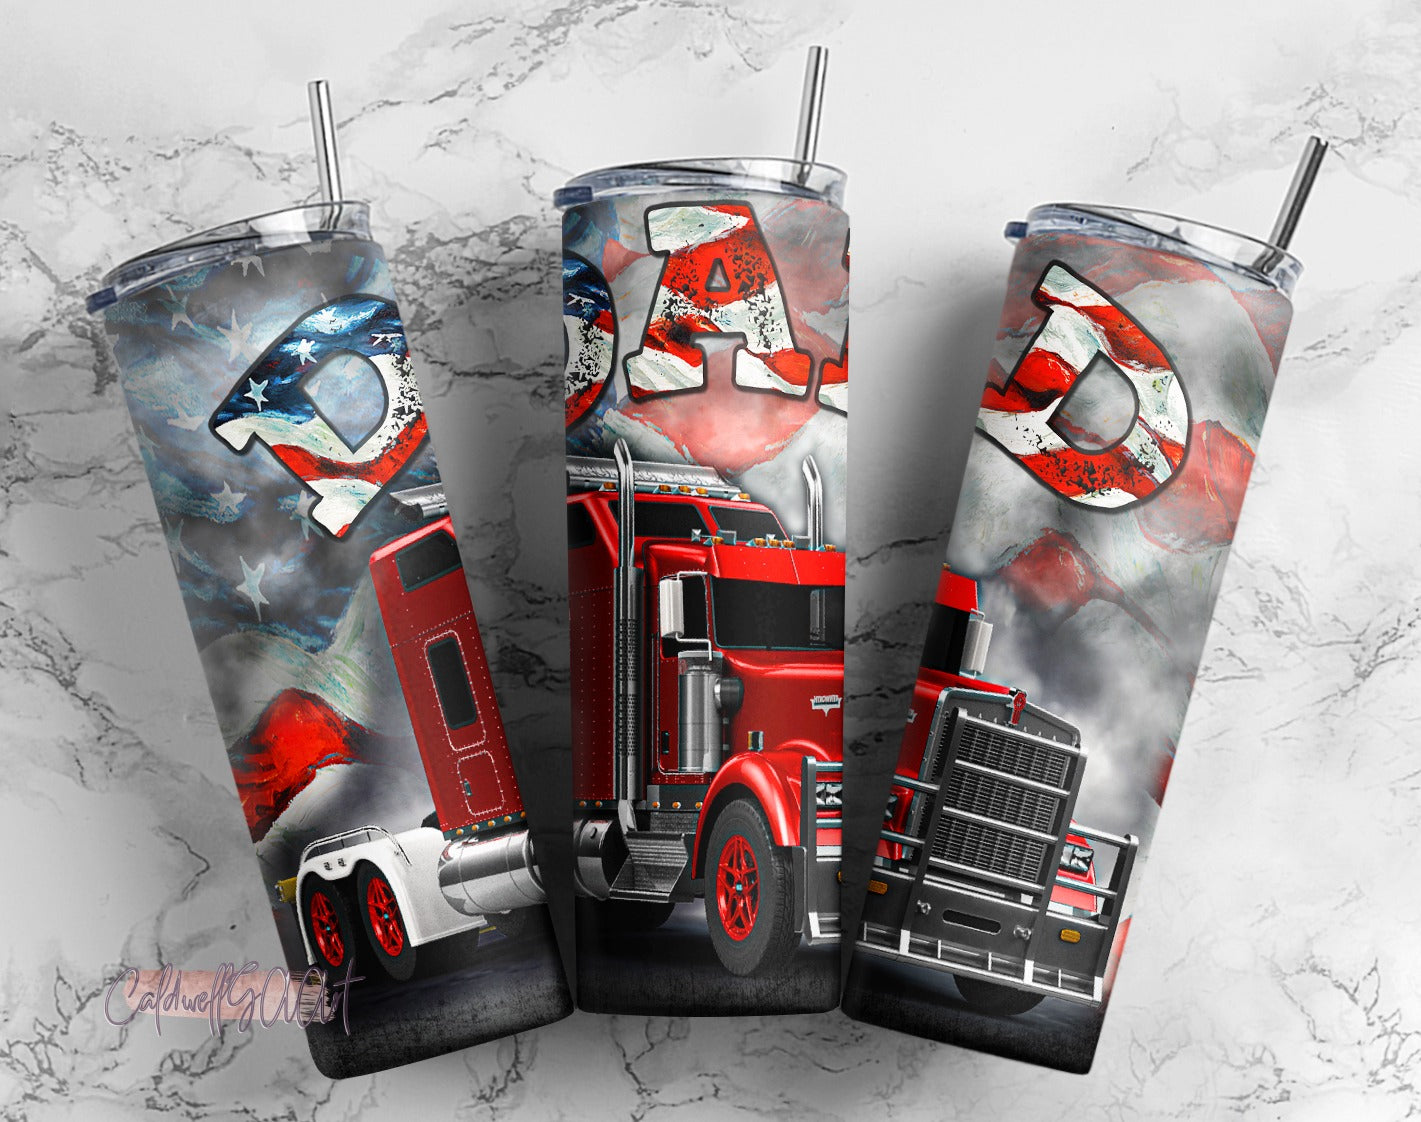 20oz Truck Driver Gifts for Men - Personalized Truck Tumbler, Best Truckin  Dad Ever - Cool Gifts for